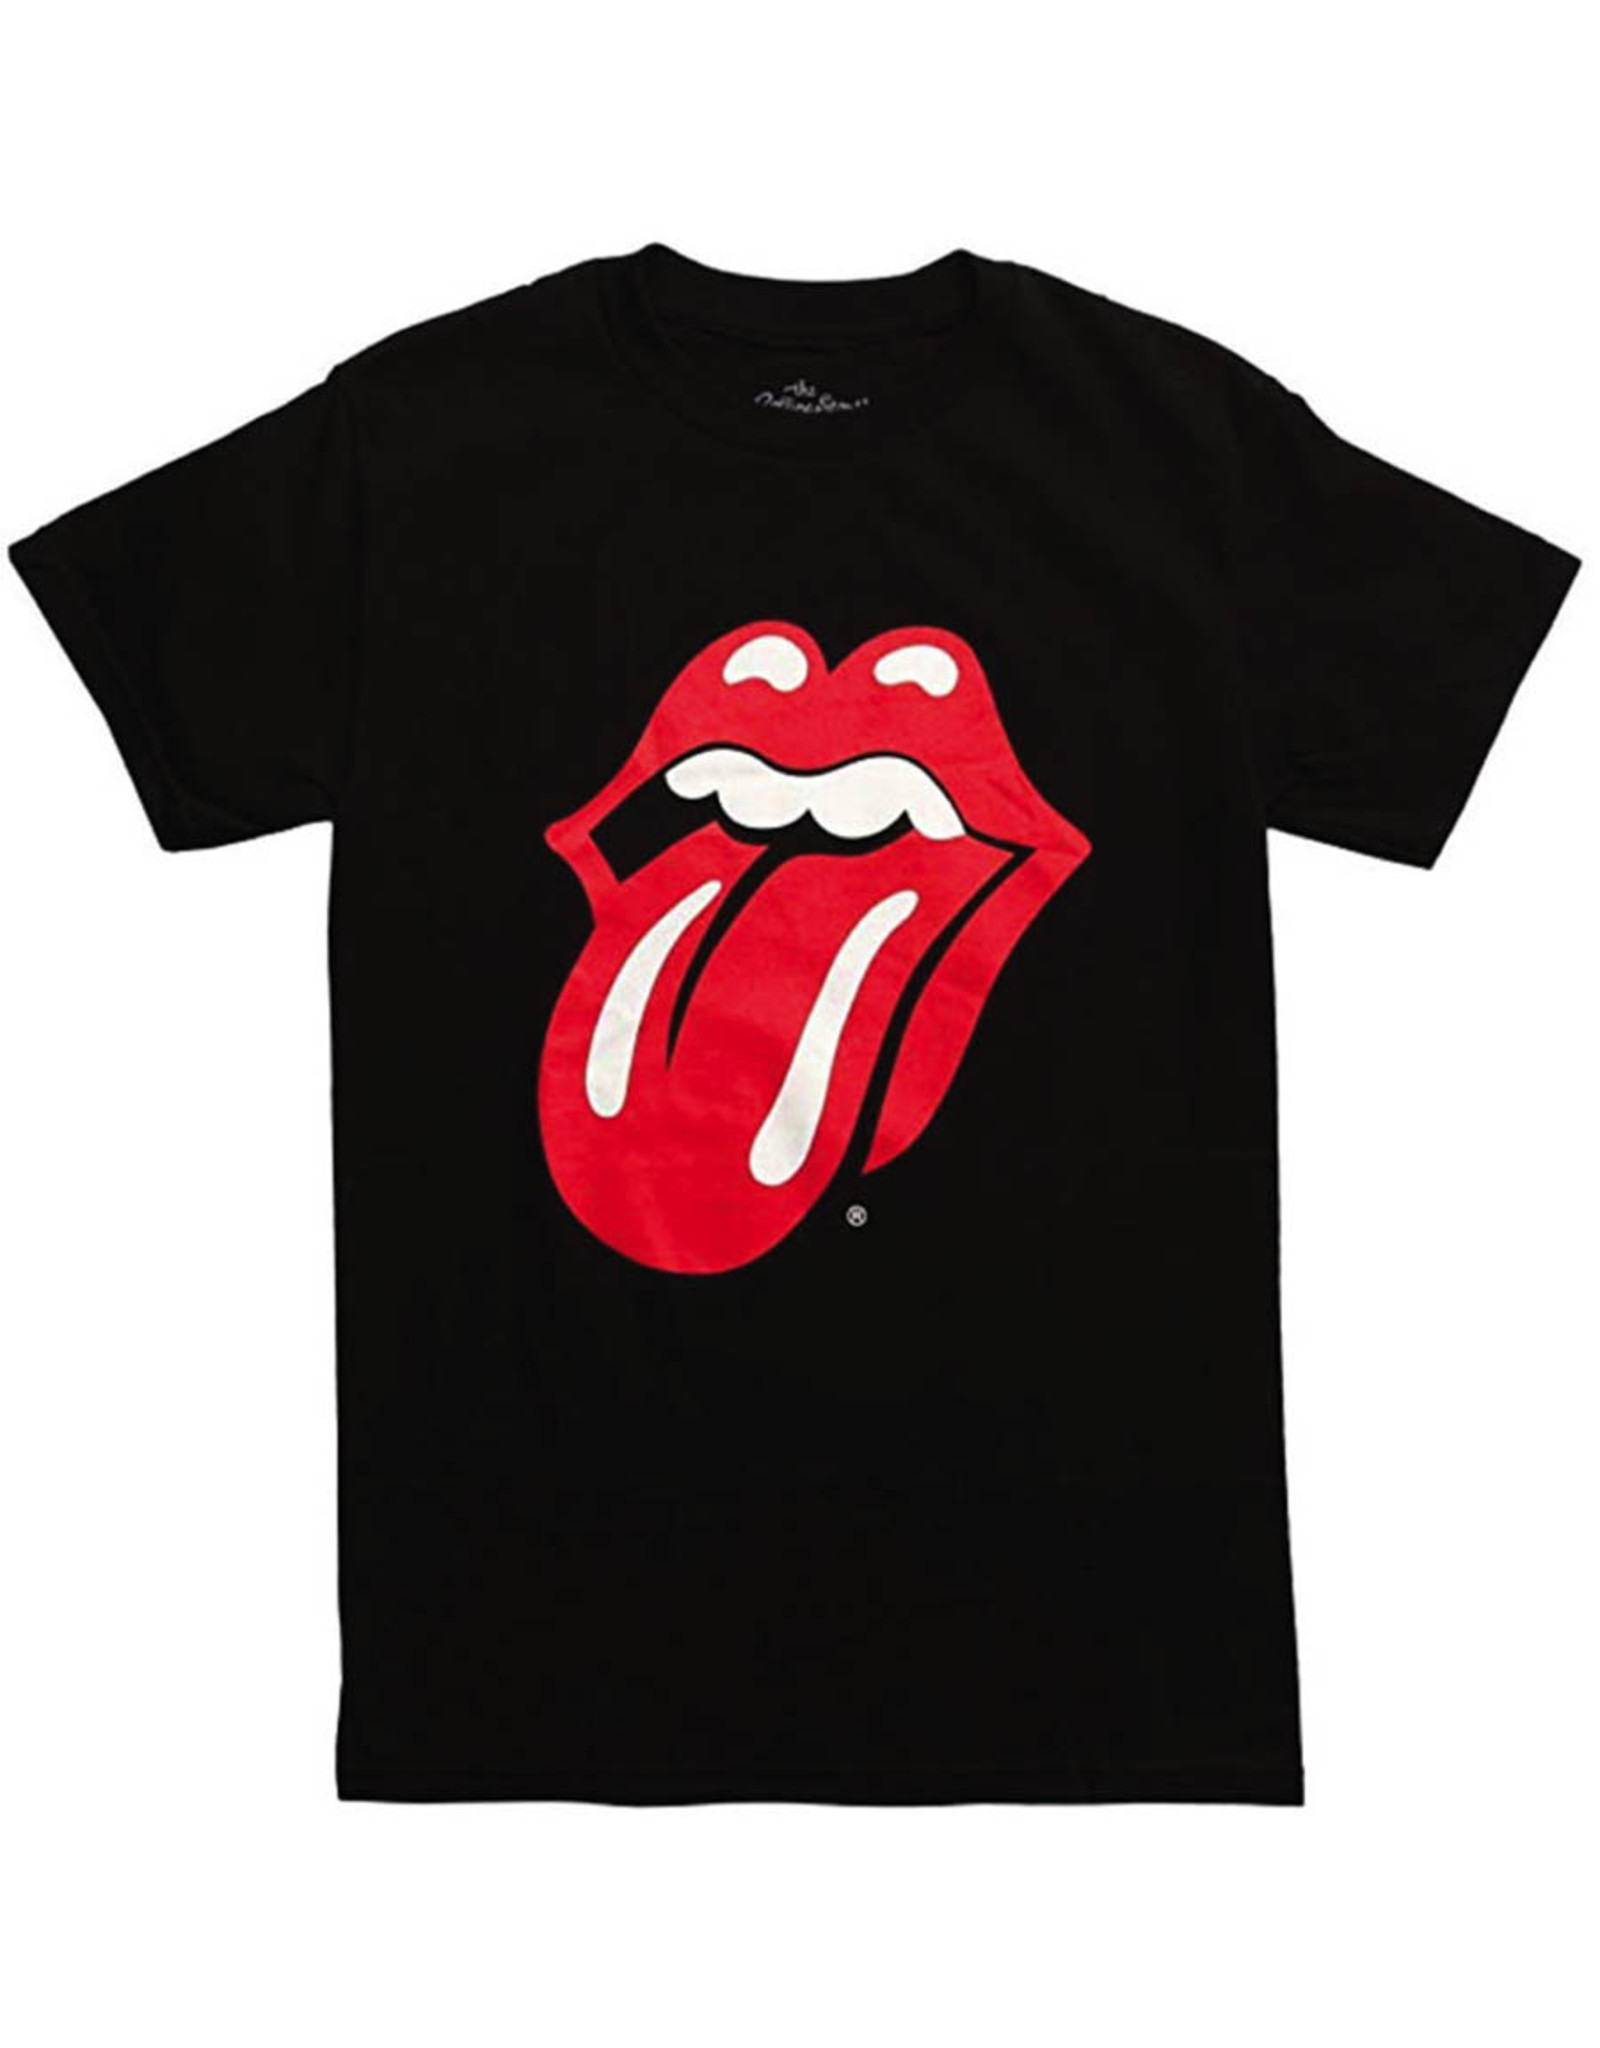 Star 500 Concert Series On Hollywood Tee Rolling Stones Tongue S/S (Black)